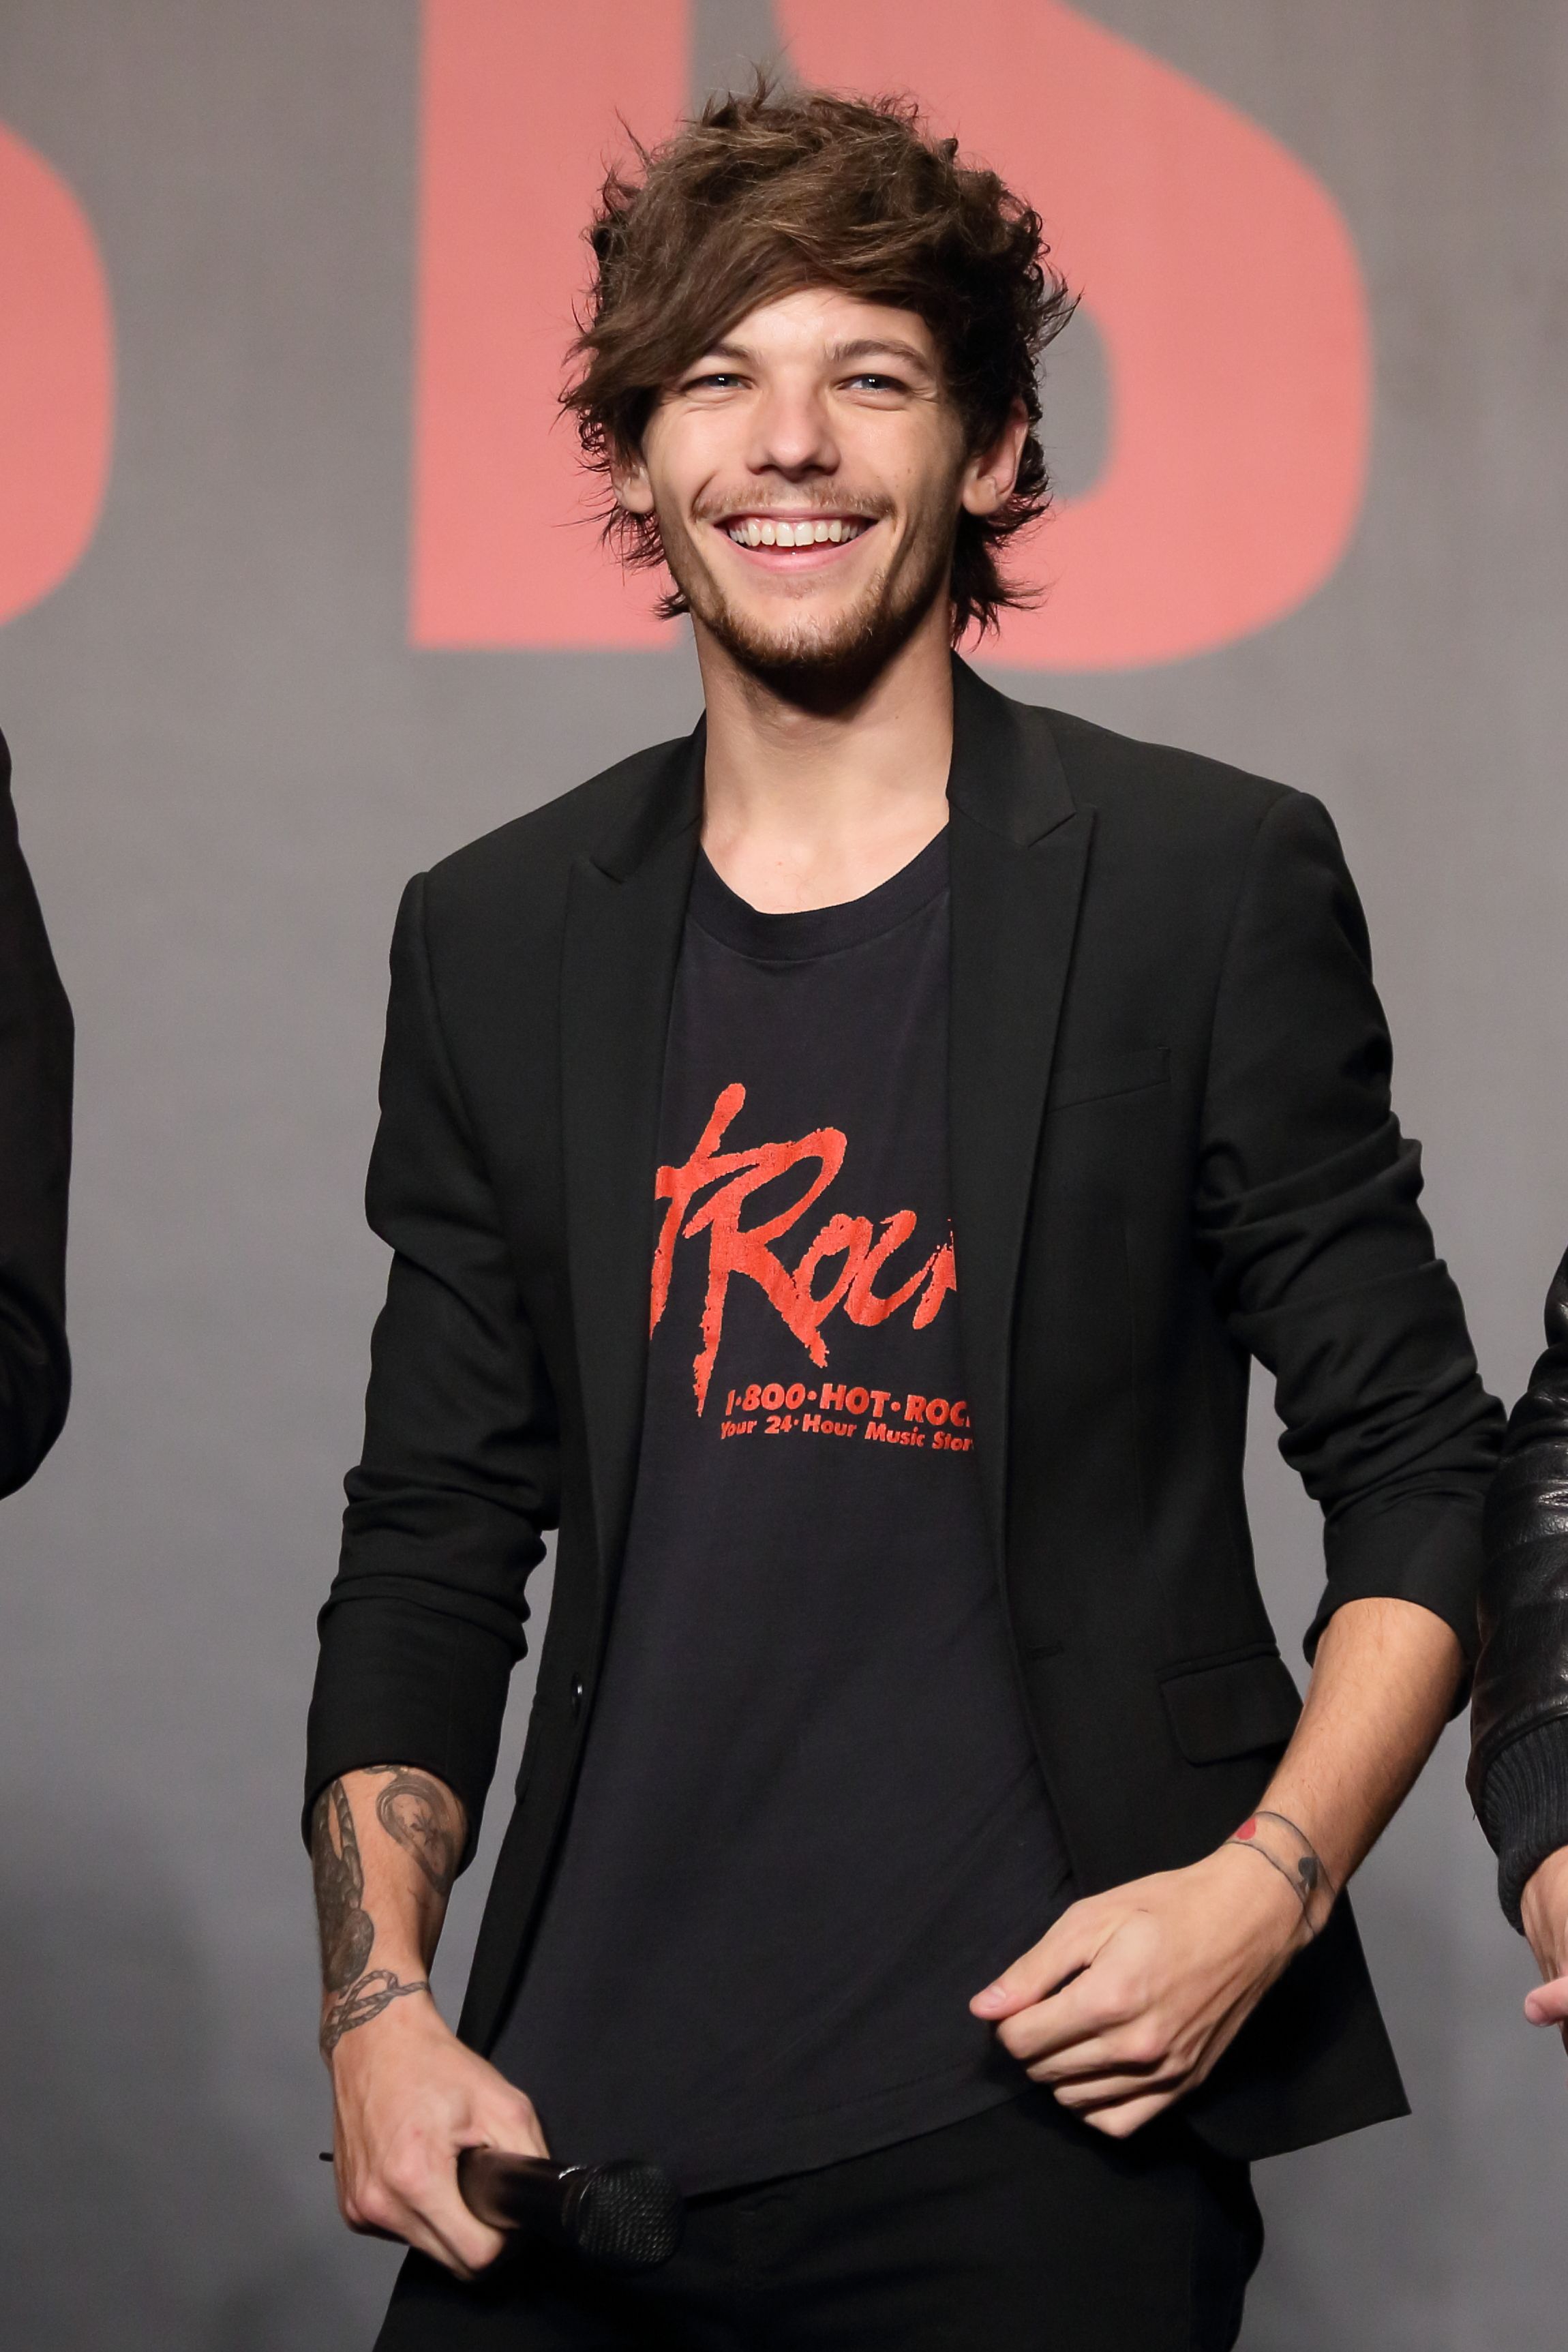 Louis Tomlinson Transformation Photos: One Direction to Now